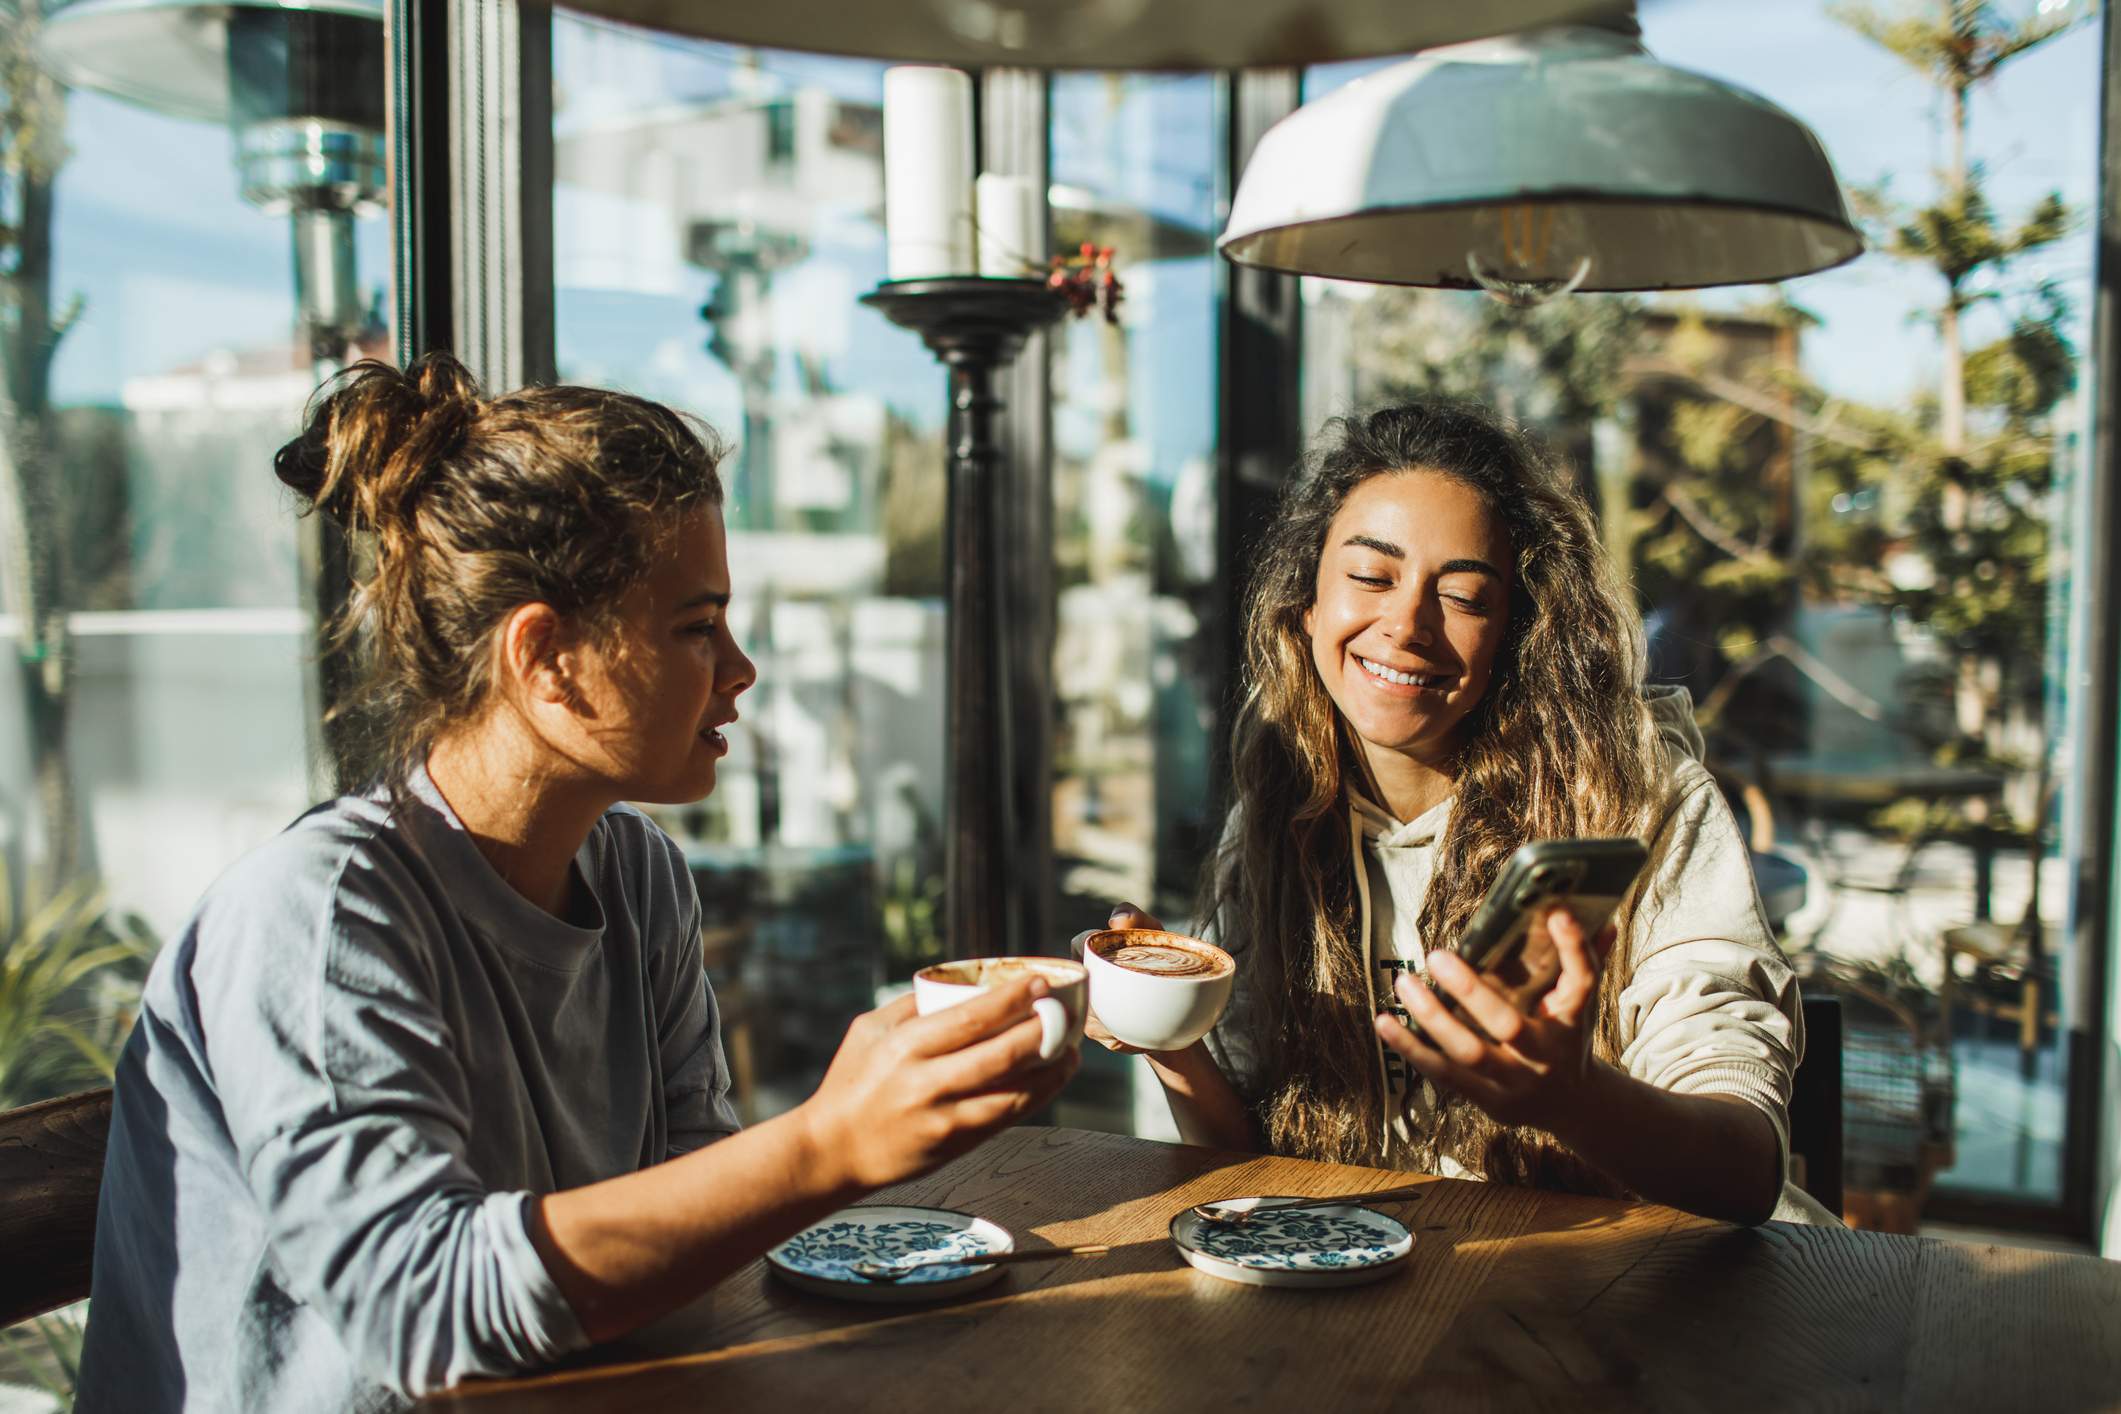 Image depicts two people drinking coffee and looking at a mobile phone in a restaurant. 